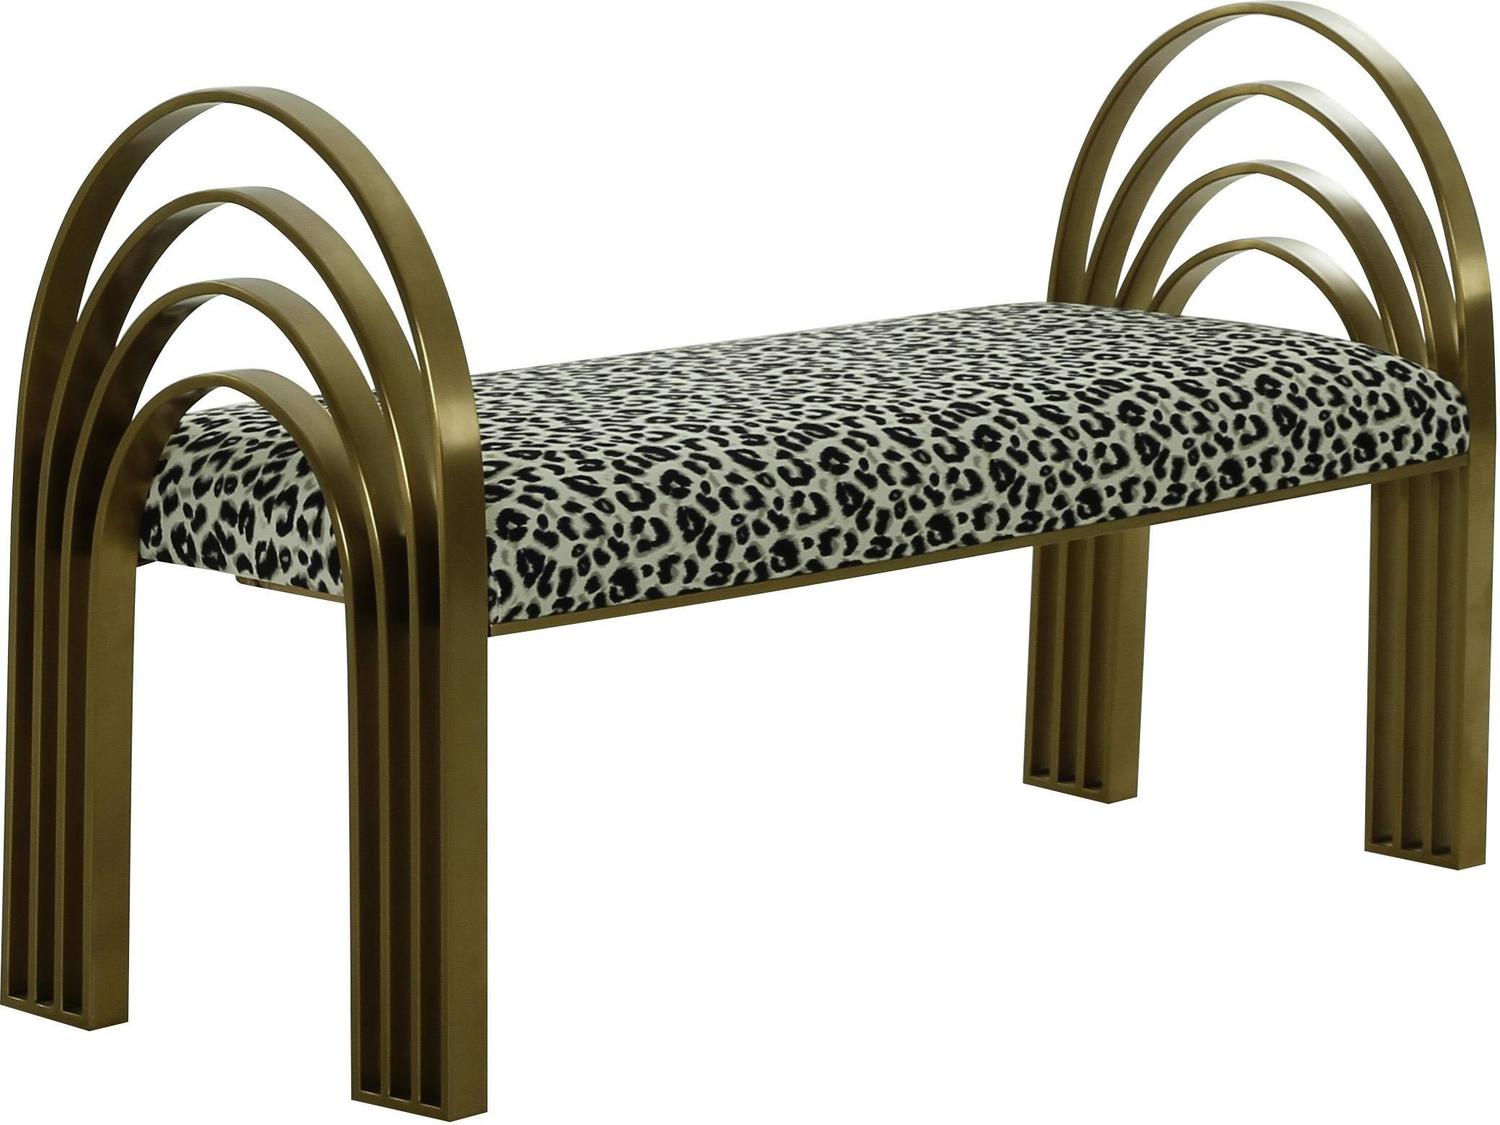 shoe storage bench with drawers Tov Furniture Benches Leopard